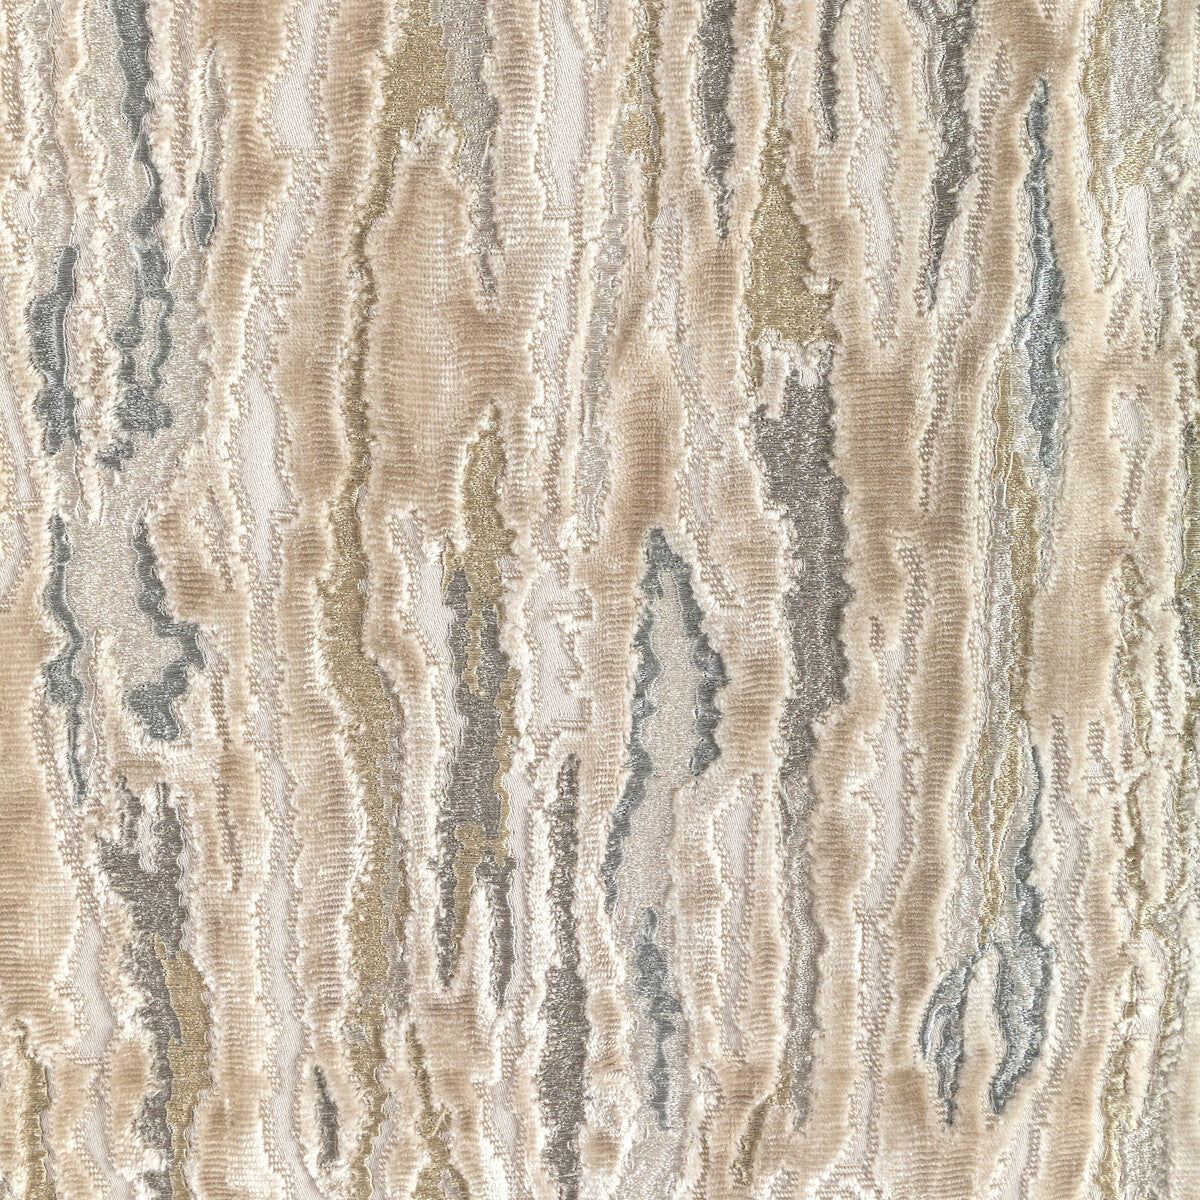 Velvet Waves fabric in cream color - pattern 36322.16.0 - by Kravet Couture in the Modern Luxe III collection